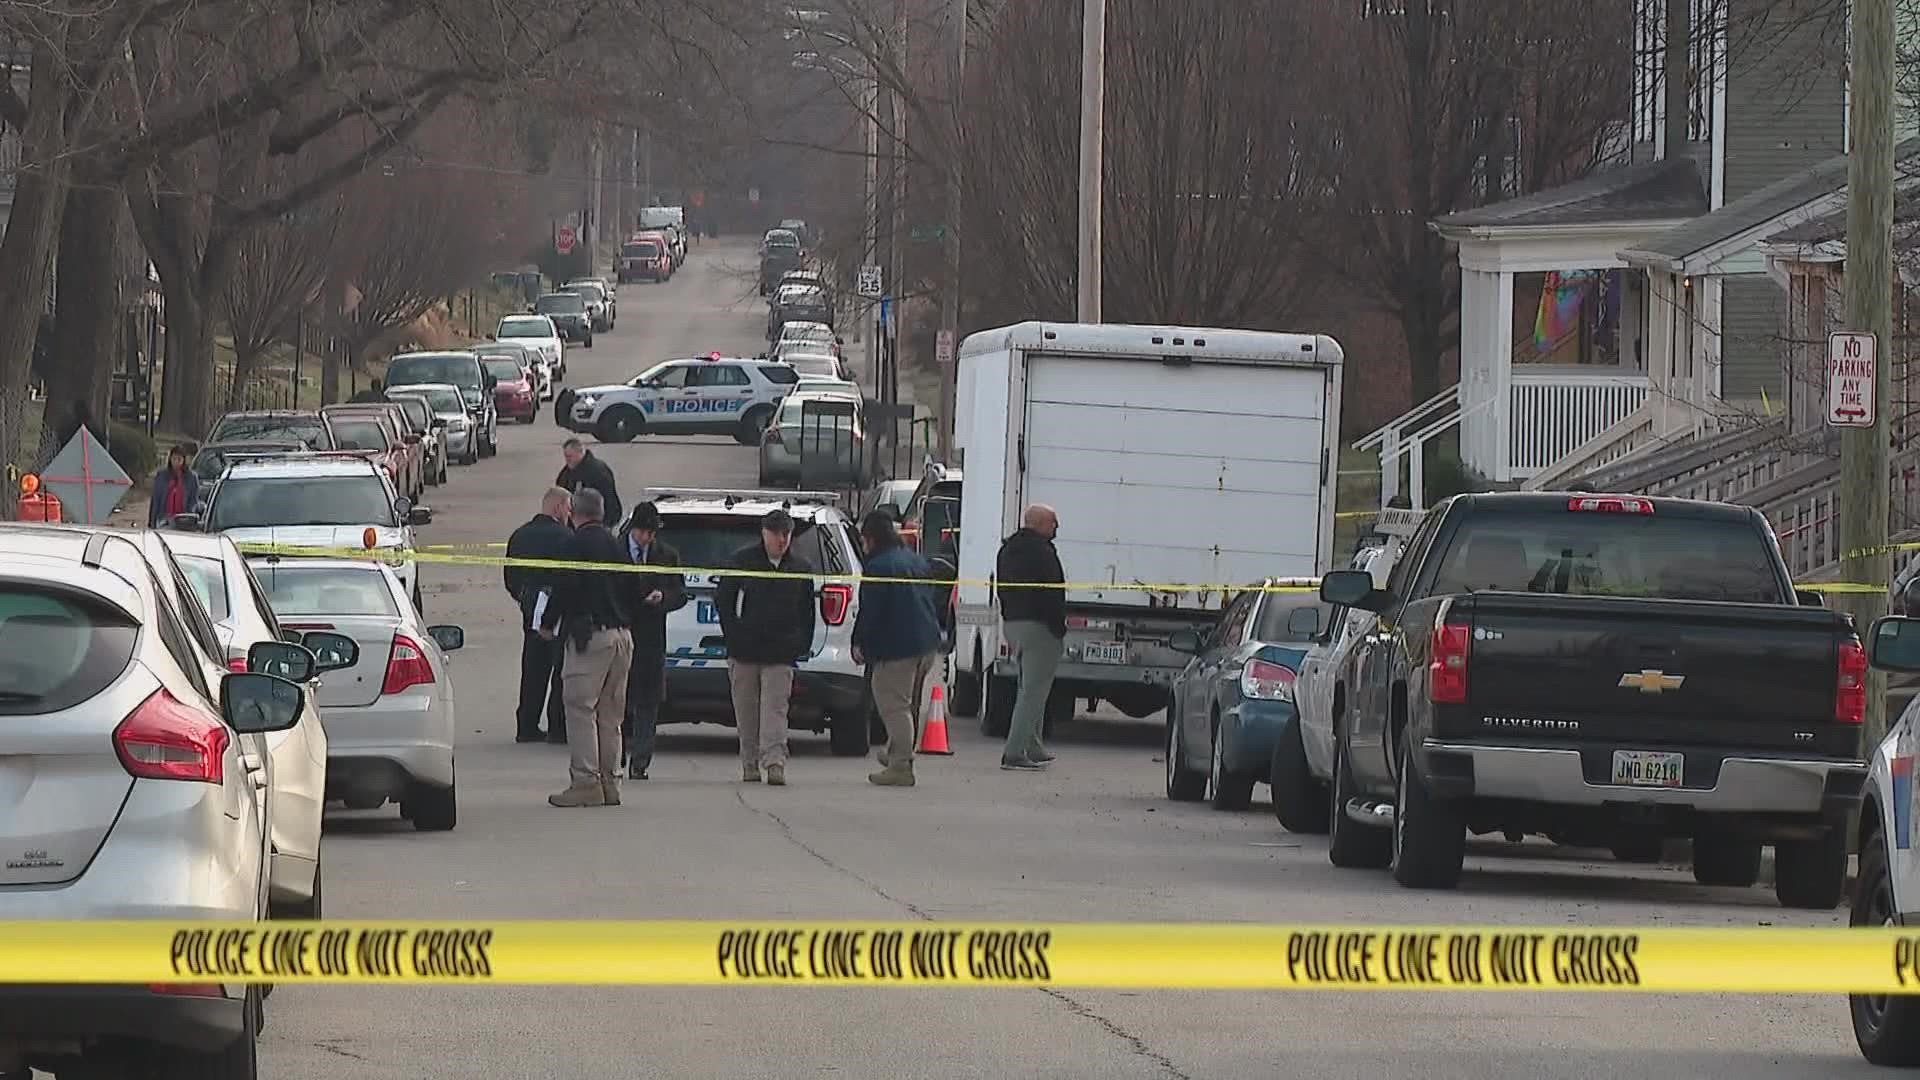 Police said the shooting victim was pronounced dead at 9:05 a.m.